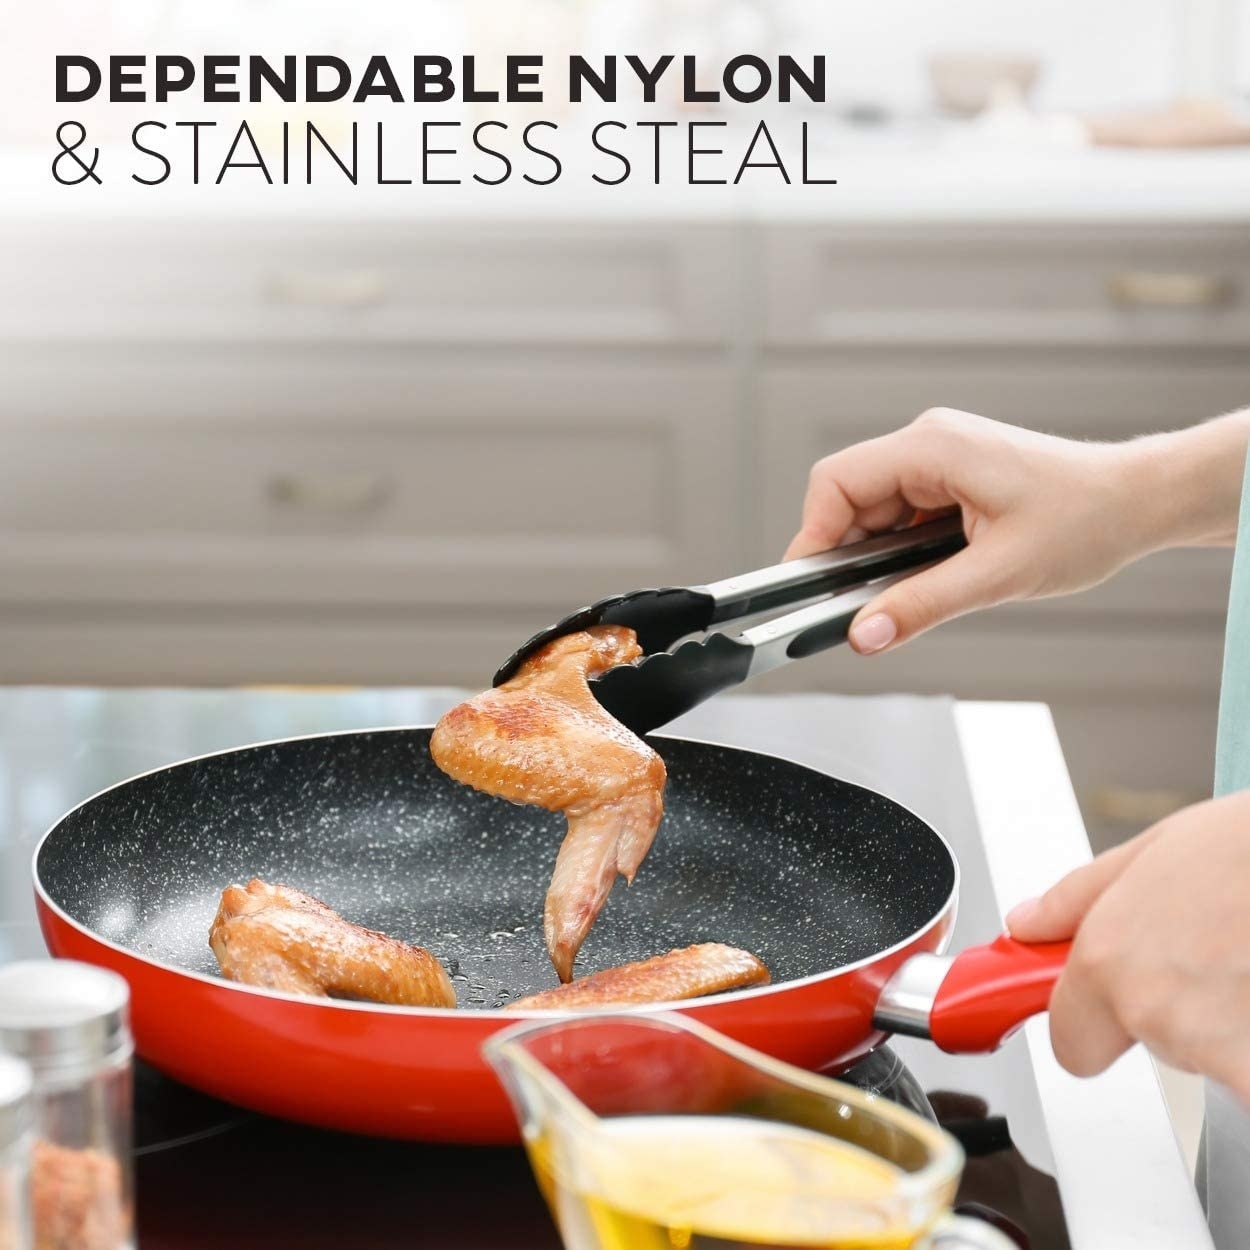 Stainless Steel and Nylon 5-piece Kitchen Utensil Tool Set - On Sale - Bed  Bath & Beyond - 8340903